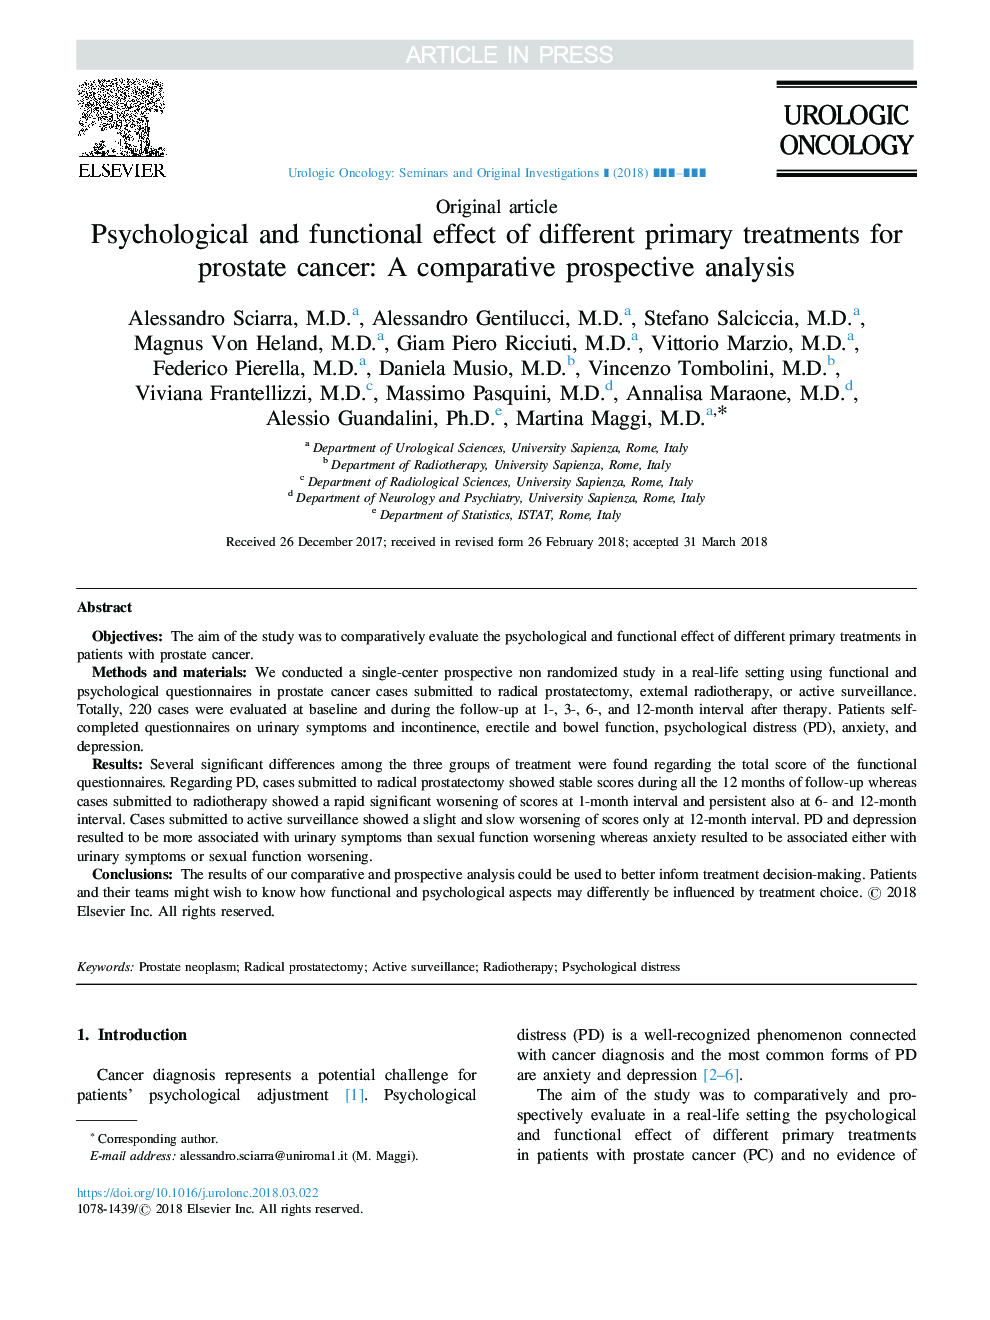 Psychological and functional effect of different primary treatments for prostate cancer: A comparative prospective analysis